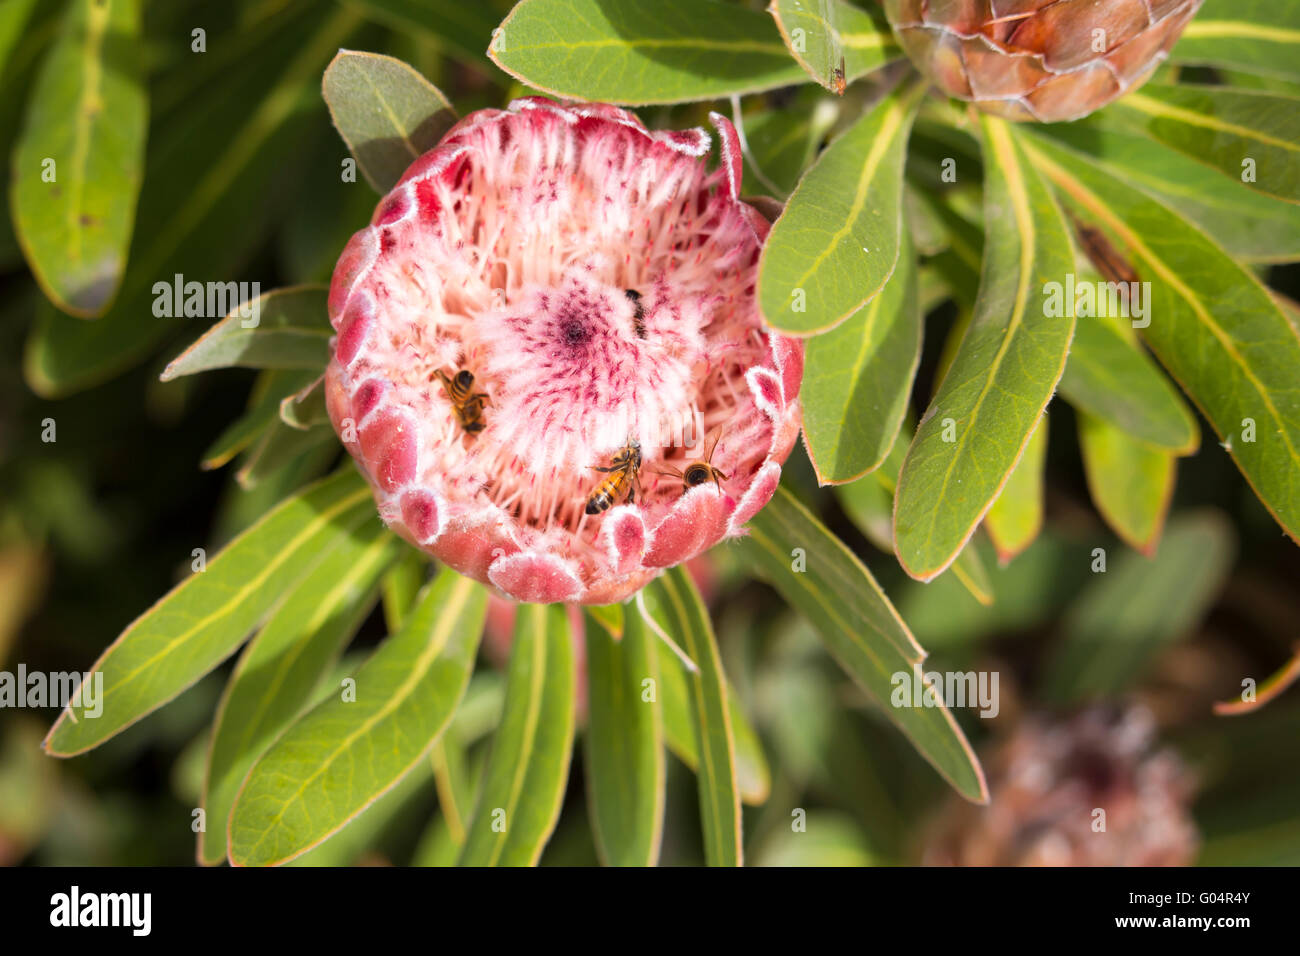 Bees getting  pollen from the  stunning pale pink long lasting decorative flowers  of a  Protea species blooming in autumn. Stock Photo